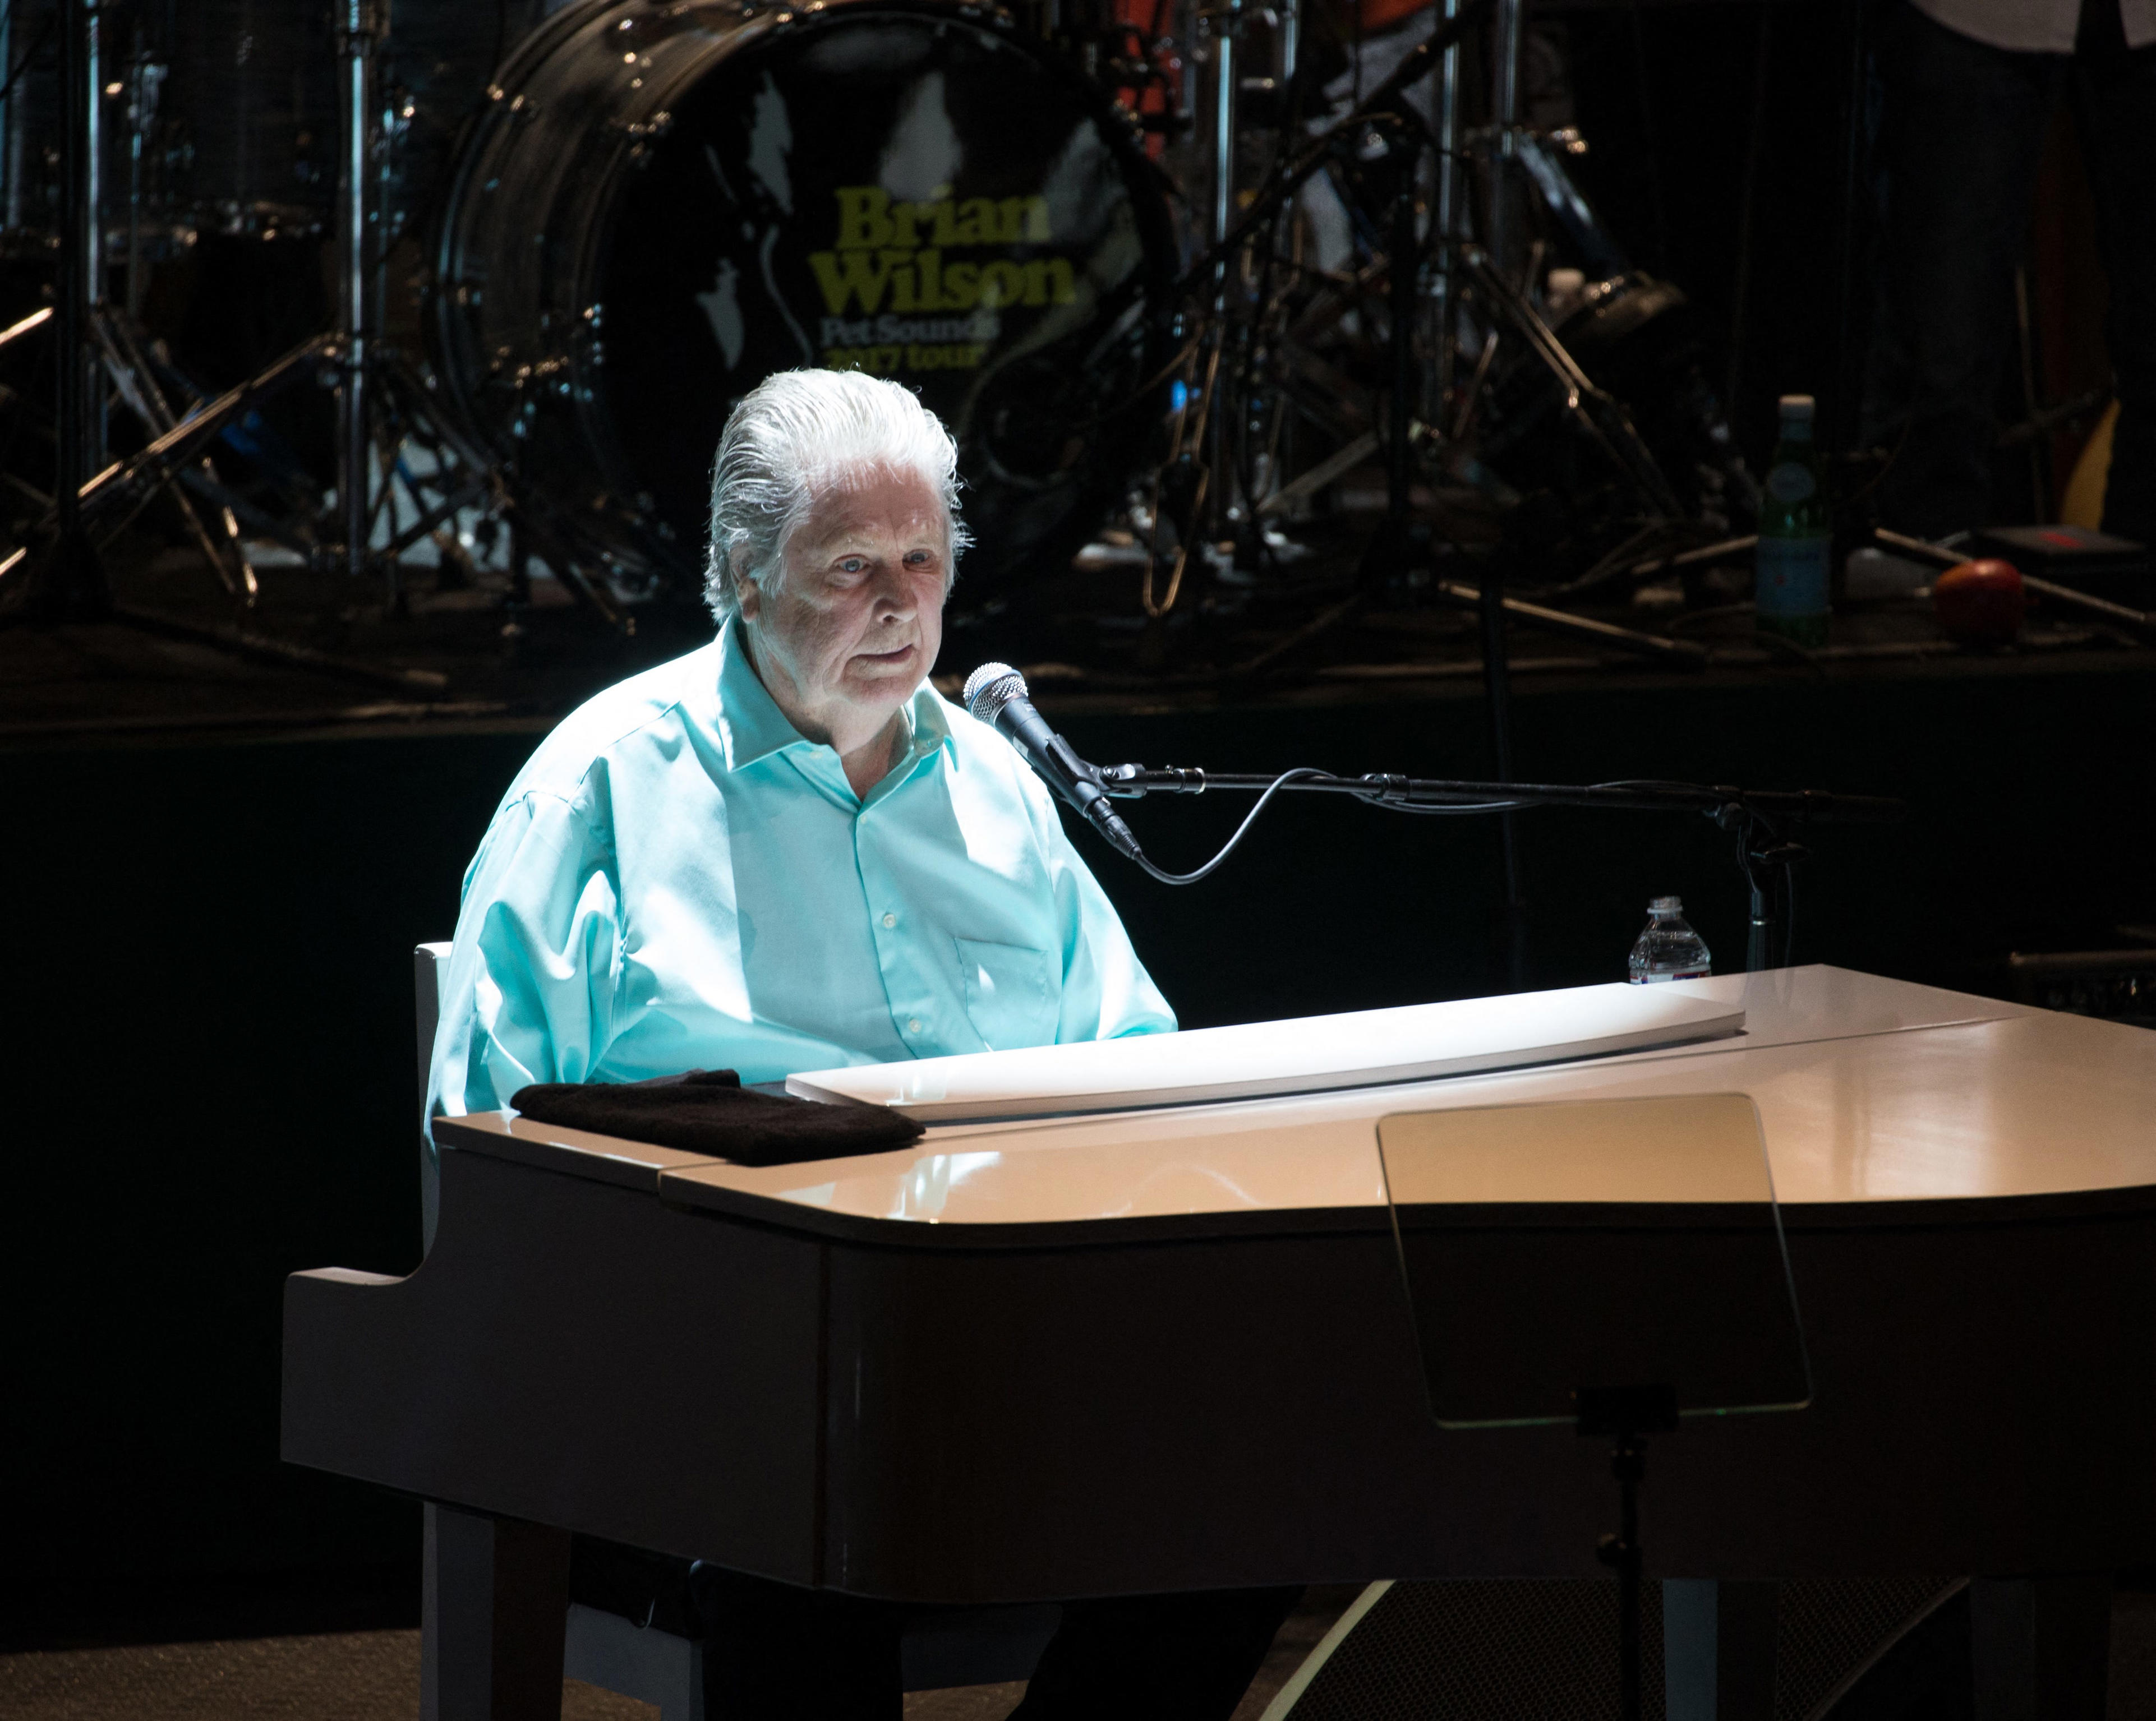 beach boys' brian wilson to be placed in conservatorship, judge rules